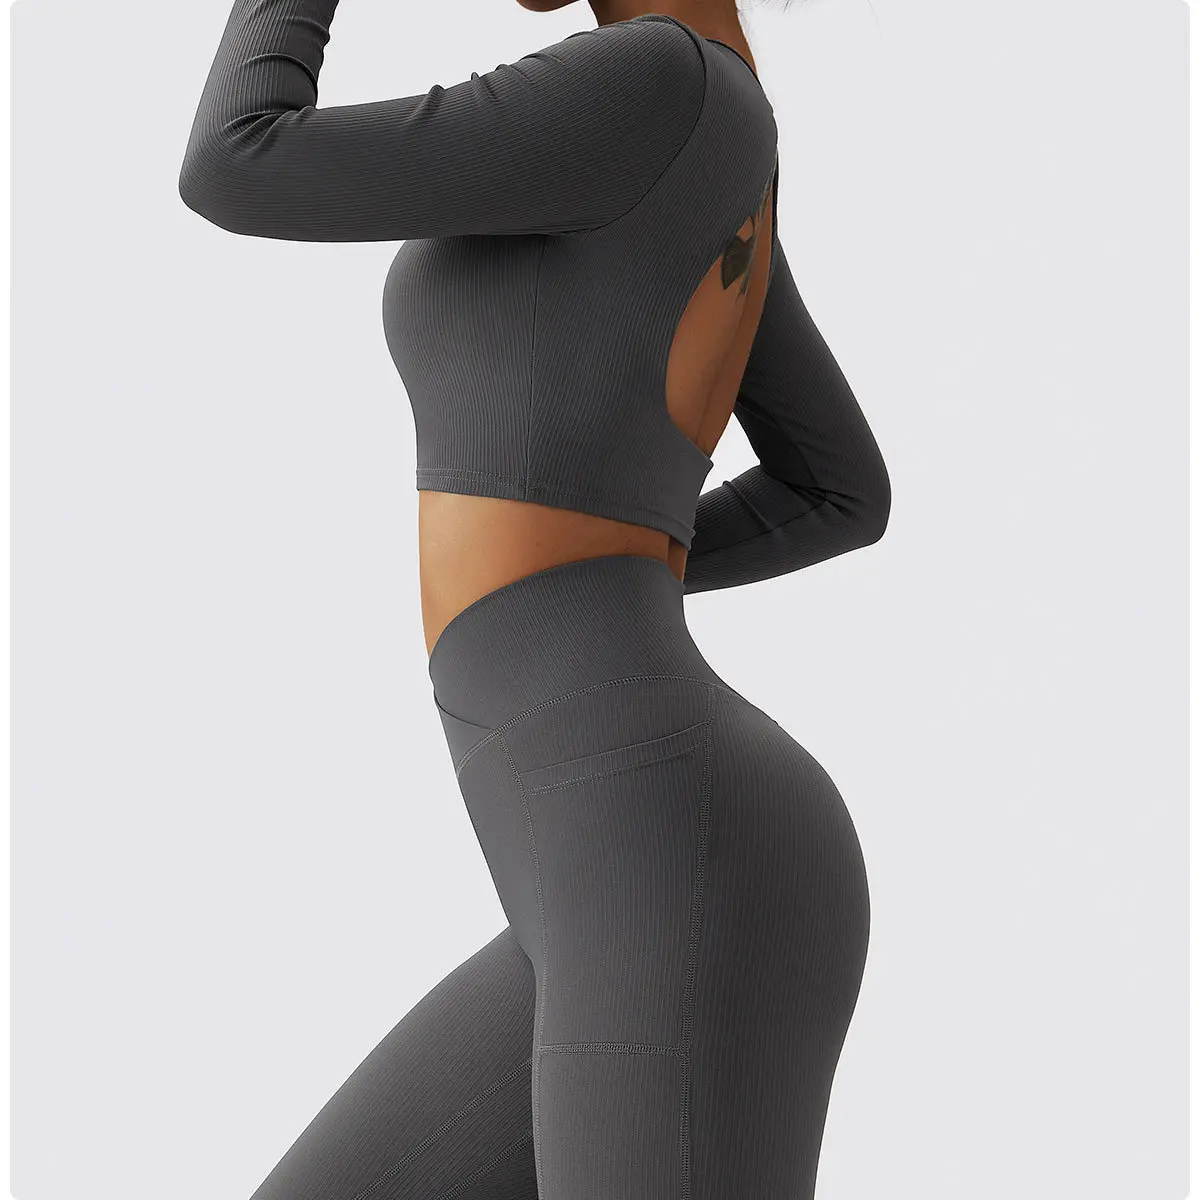 YIYI Ribbed Soft Fabrics Back Hollow Out Yoga Tops Women Tights Breathable Workout Tops Sports T-shirt Women Long Sleeve